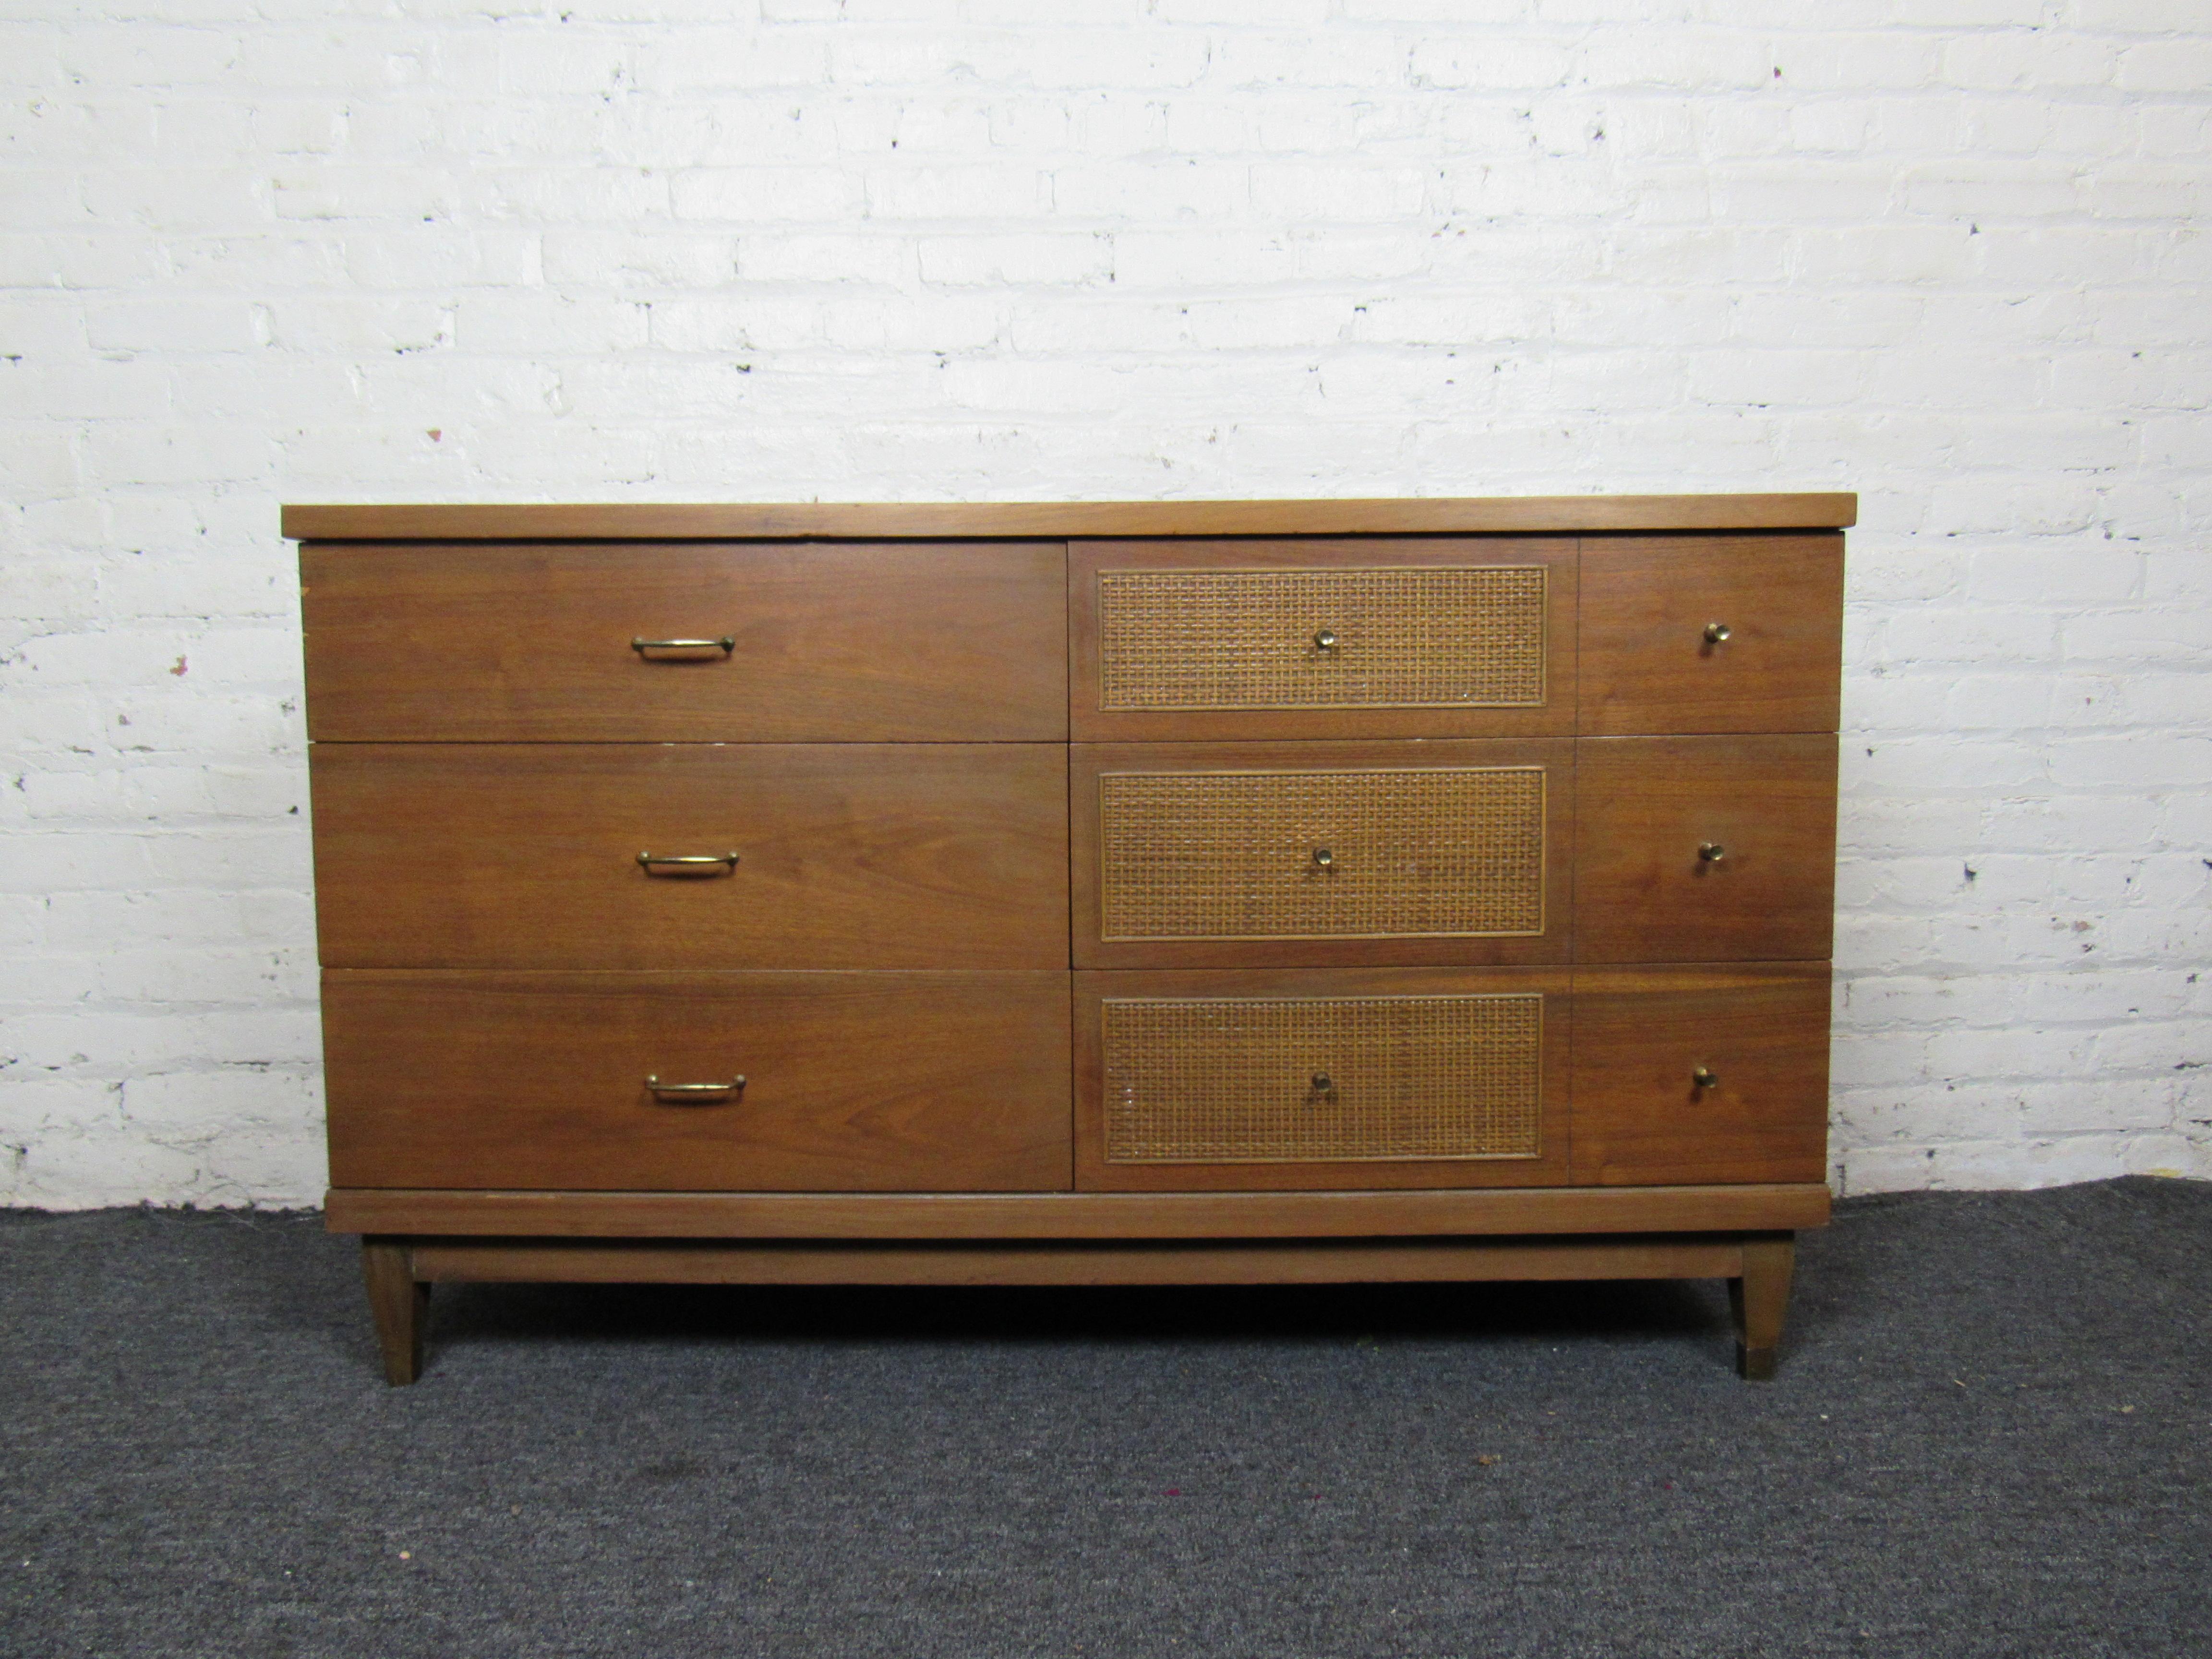 Very nice mid-century dresser with brass fixtures and wicker accents. Six pull-out drawers in a variety of sizes for ample storage and organization. Please confirm item location with seller (NY/NJ).